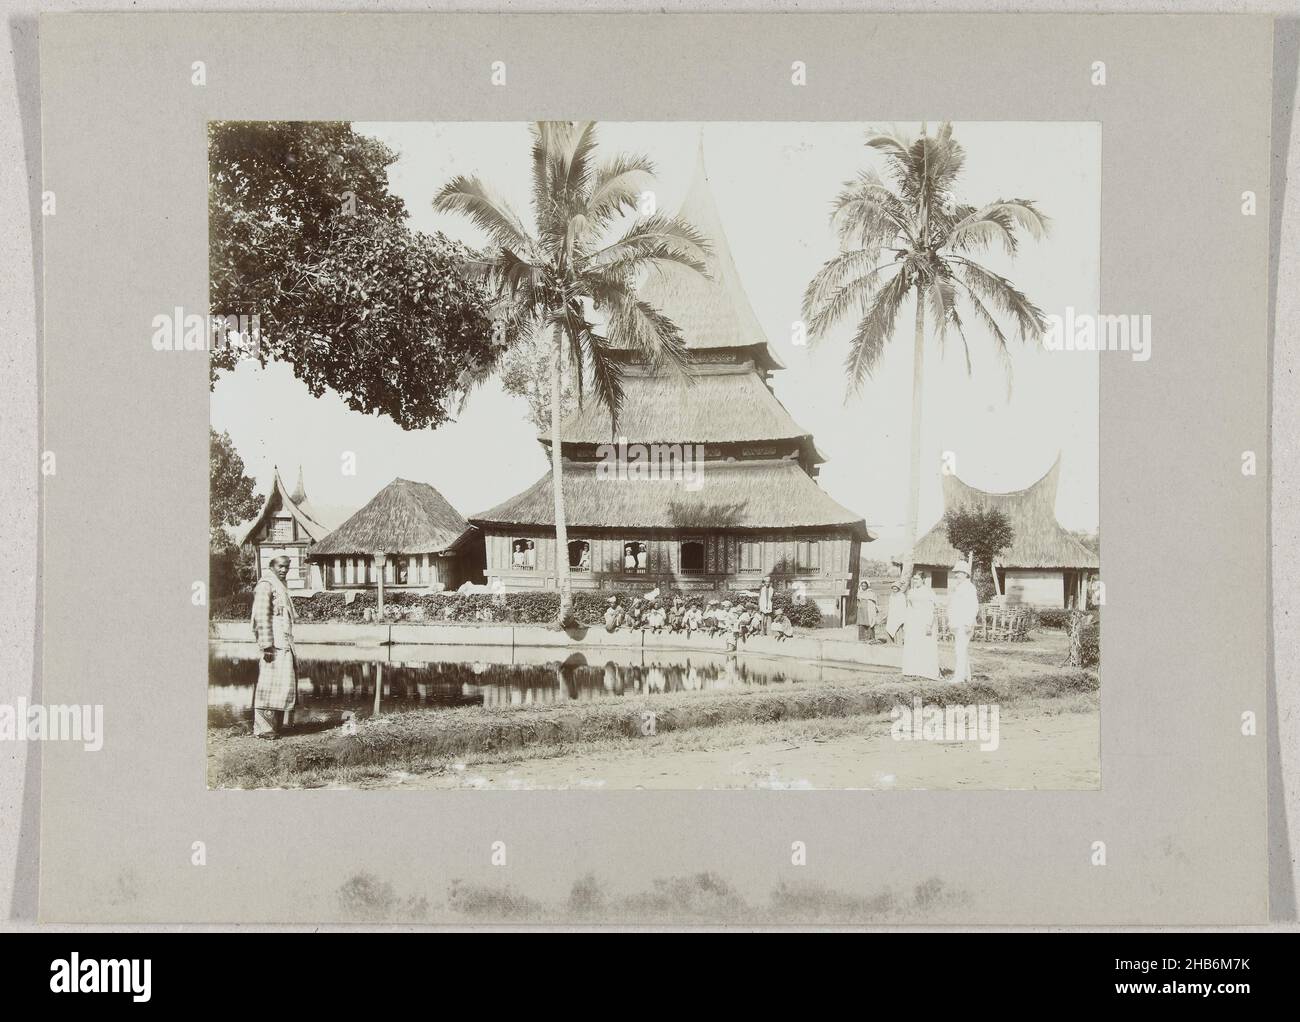 Mosque with fish pond in Kampong Taloek near Fort de Kock6. Fishpond Fort de Kock (title on object), Mosque with fishpond at Kampong Taloek near Fort de Kock, Sumatra, Dutch East Indies. On the right a Western couple, children near the edge of the pond., anonymous, Sumatra, c. 1895 - c. 1915, photographic support, paper, gelatin silver print, height 180 mm × width 240 mmheight 243 mm × width 329 mm Stock Photo